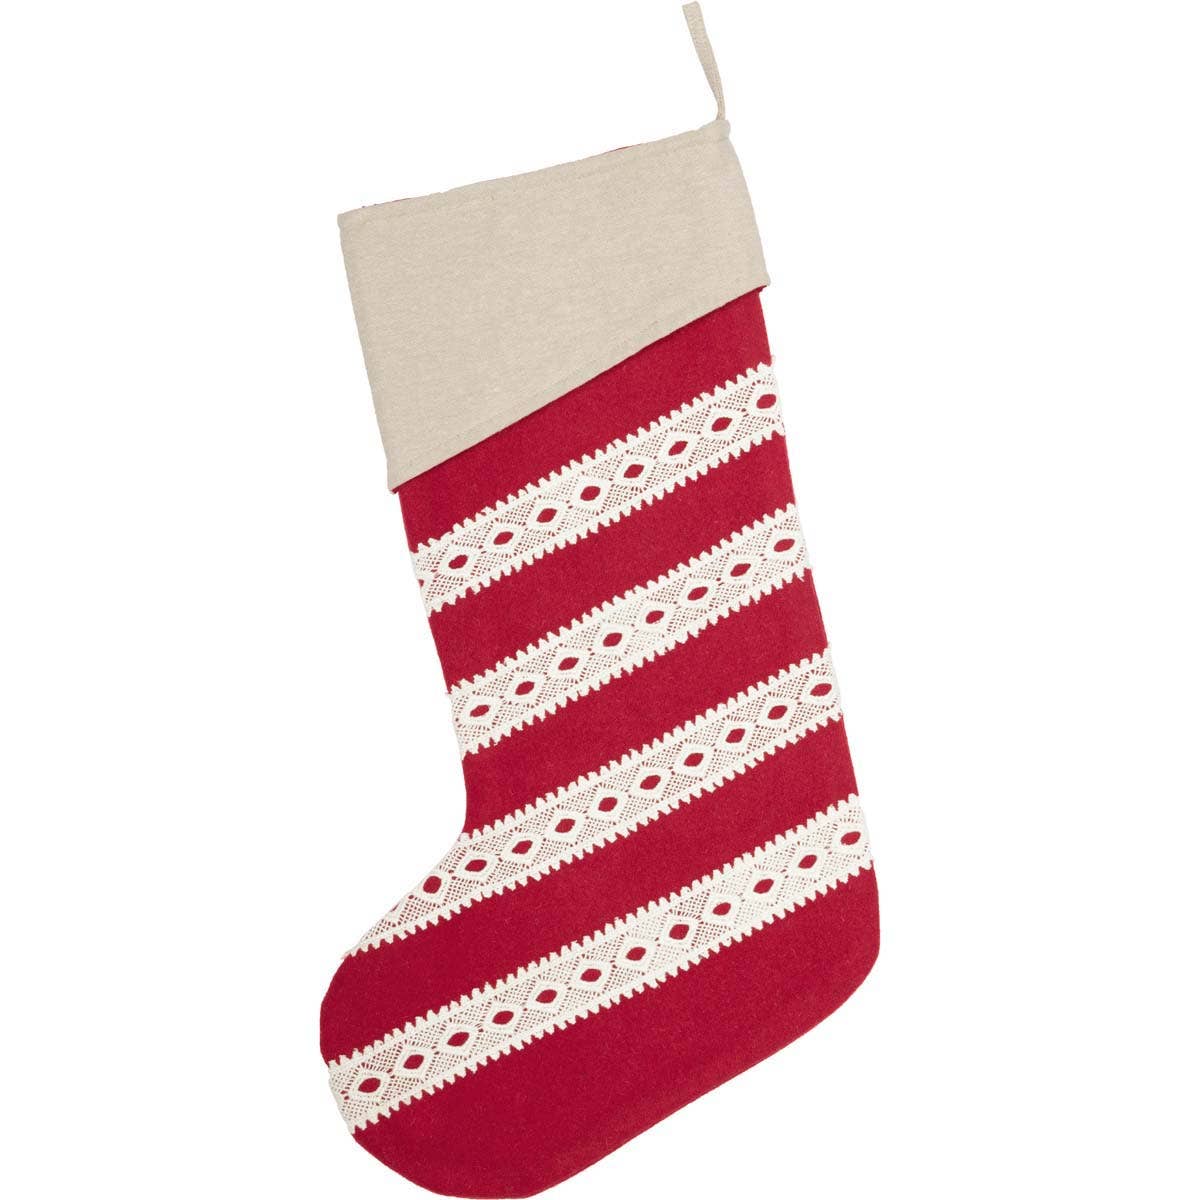 red Christmas stocking with cream colored lace trim